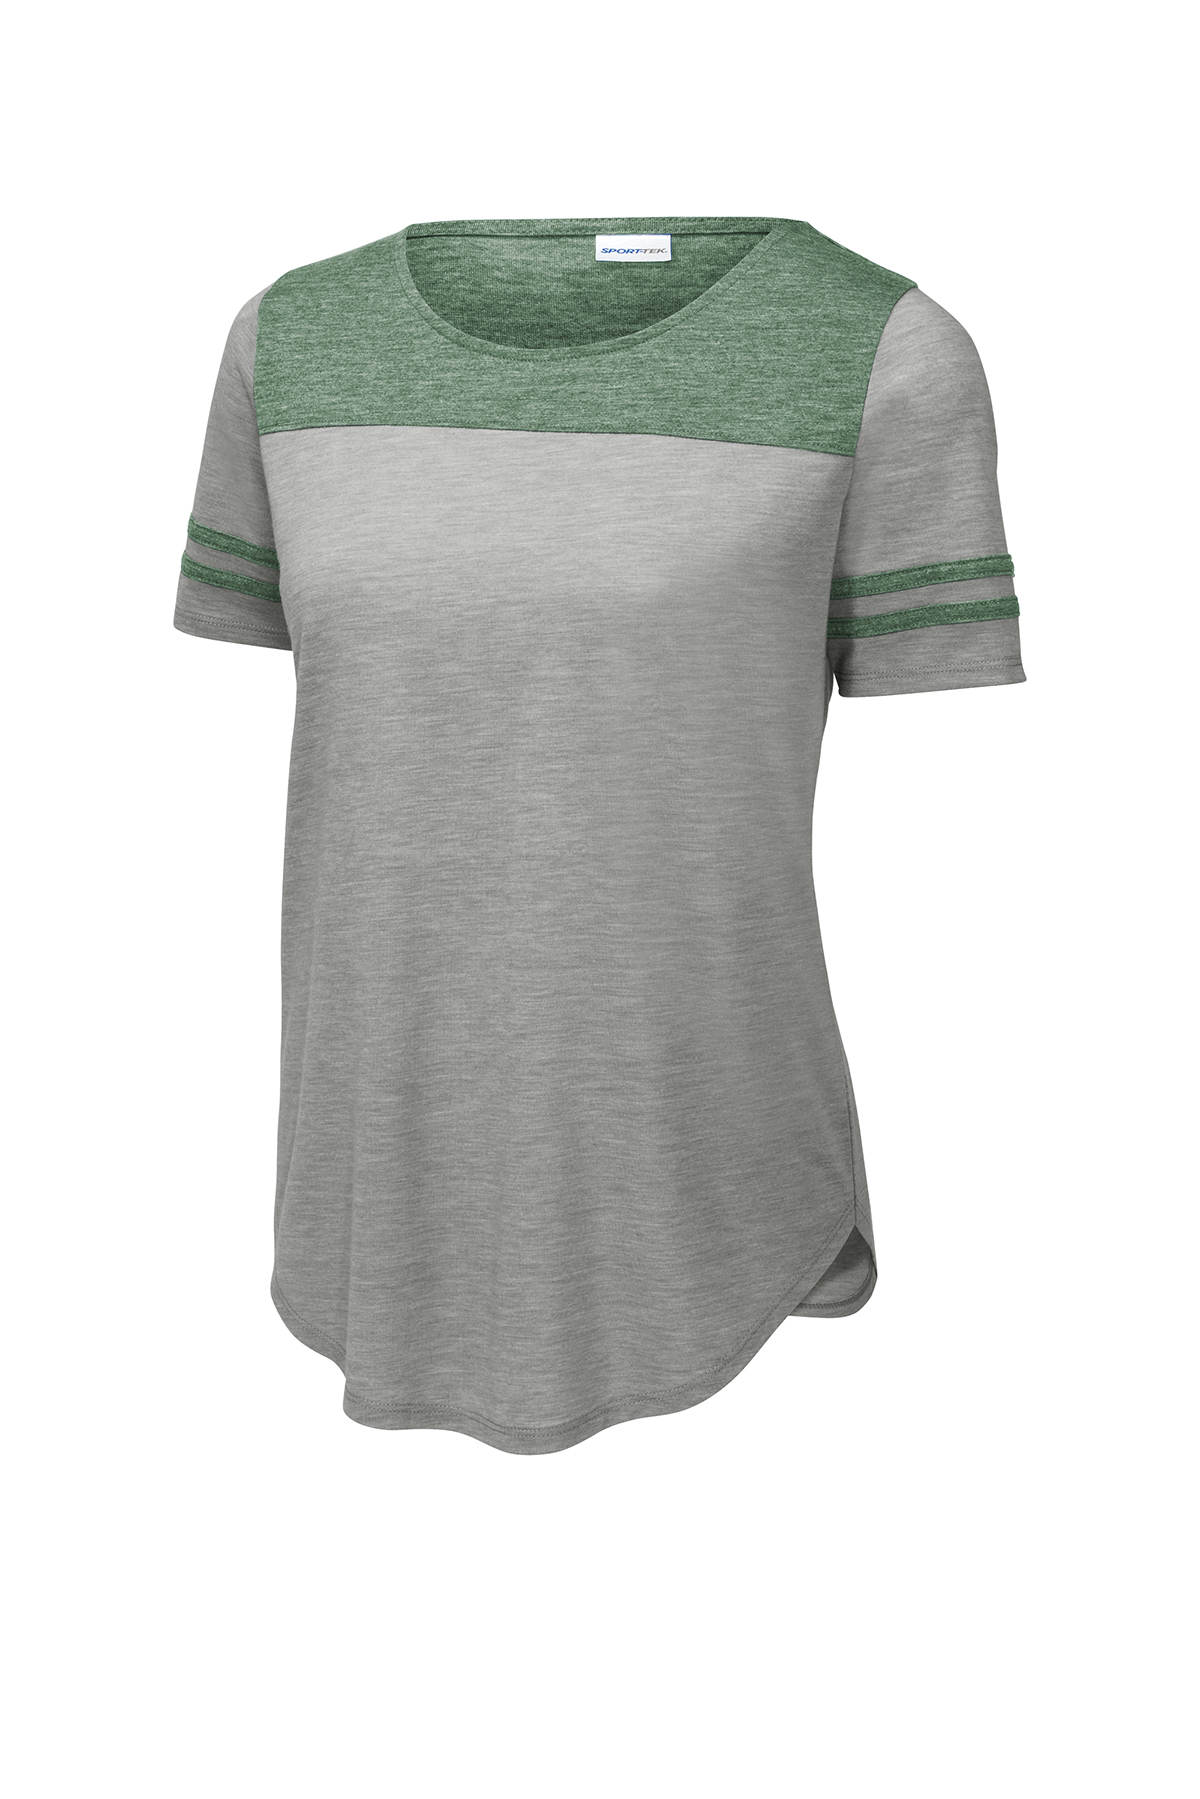 click to view Forest Green Heather/ Light Grey Heather